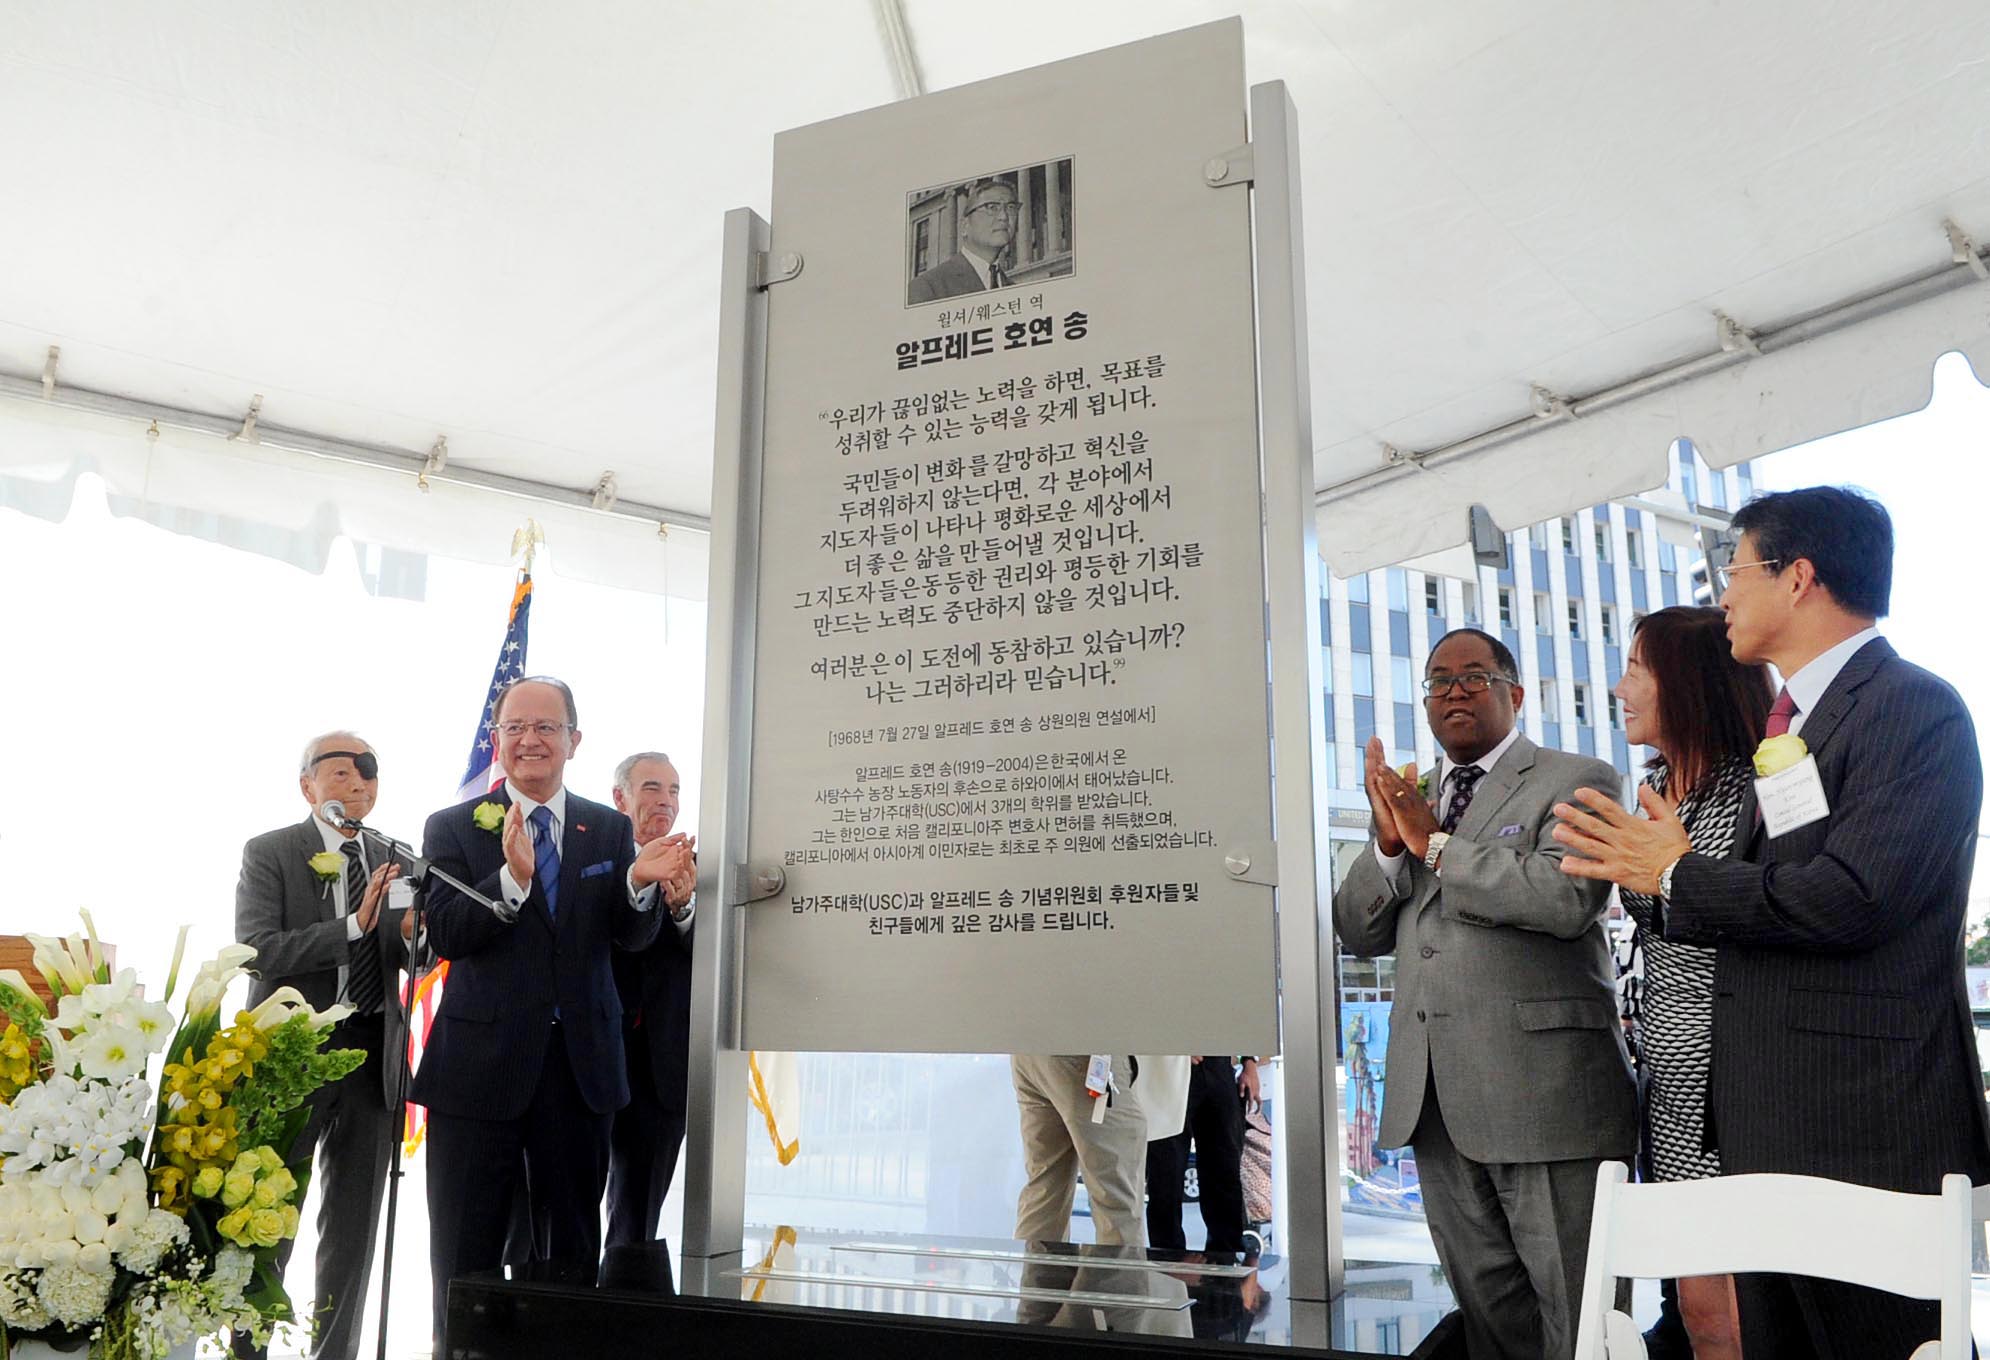 The Alfred H. Song memorial at Wilshire-Western Metro station was revealed Oct. 3. Left to right: USC President Max Nikias, L.A. County Supervisor Mark Ridley-Thomas, Leslie Song. (Park Sang-hyuk/The Korea Times)